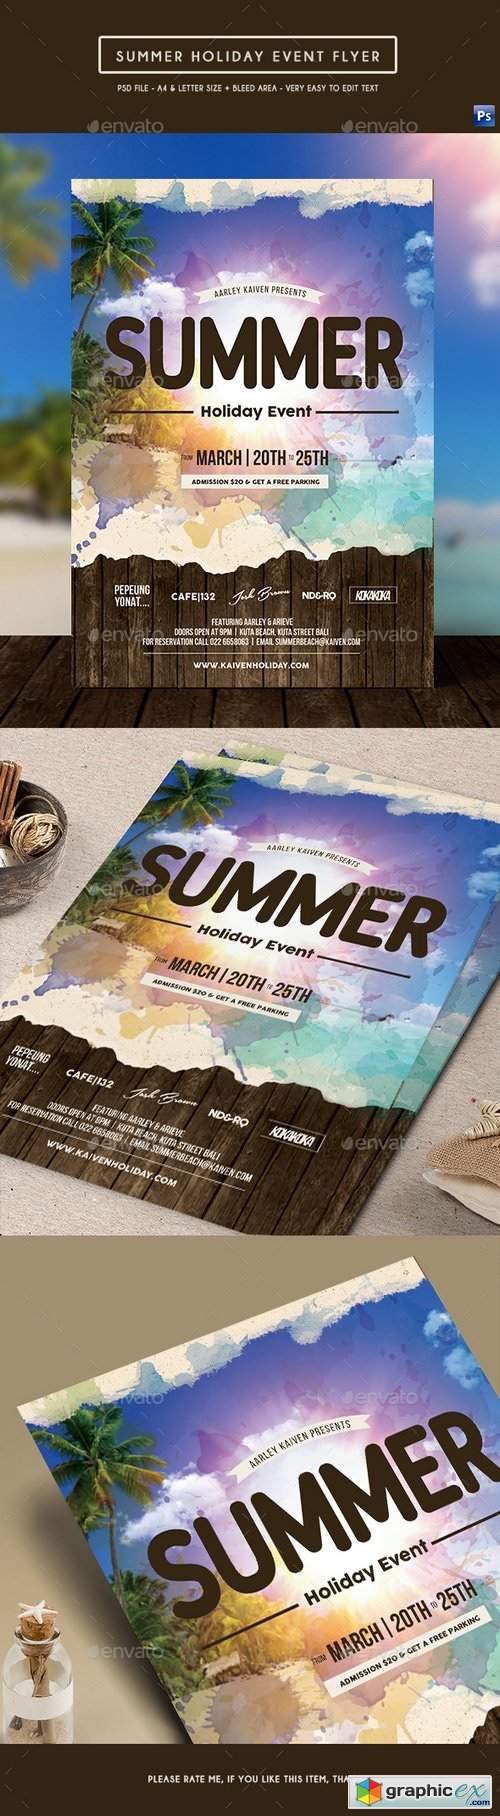 Summer Holiday Event Flyer